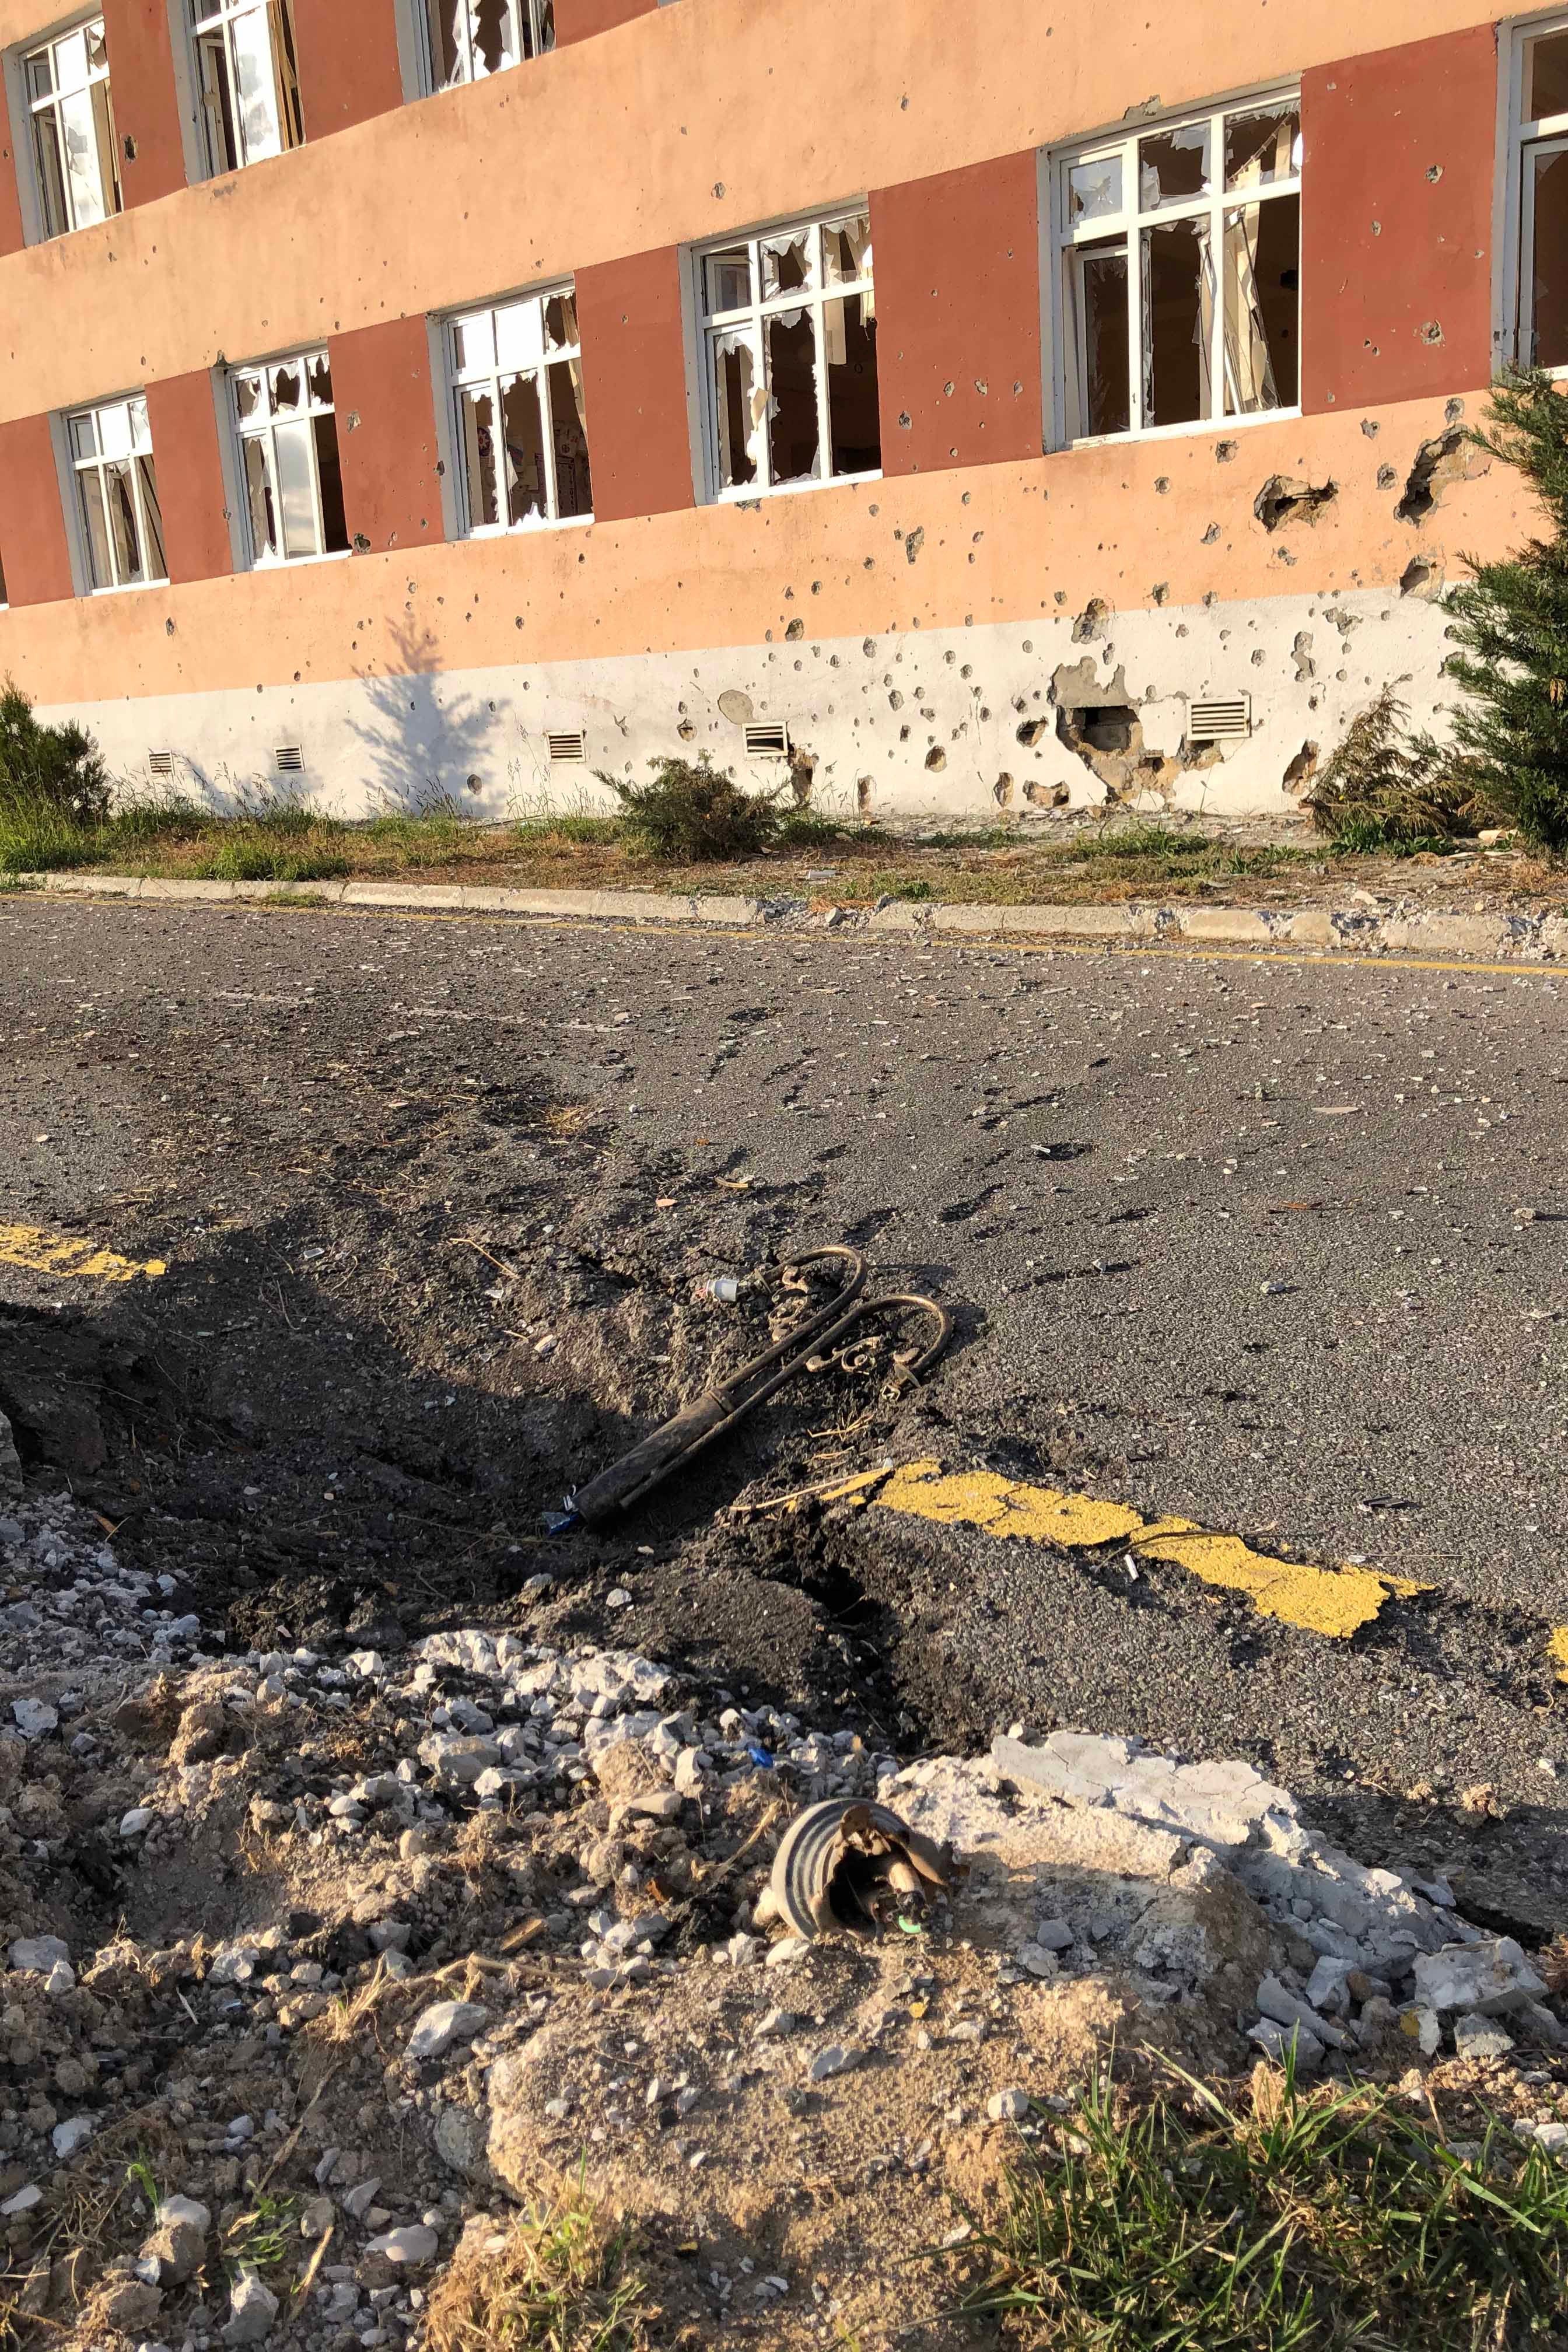 A missile crater in a paved road and shelling damage to the exterior of a school